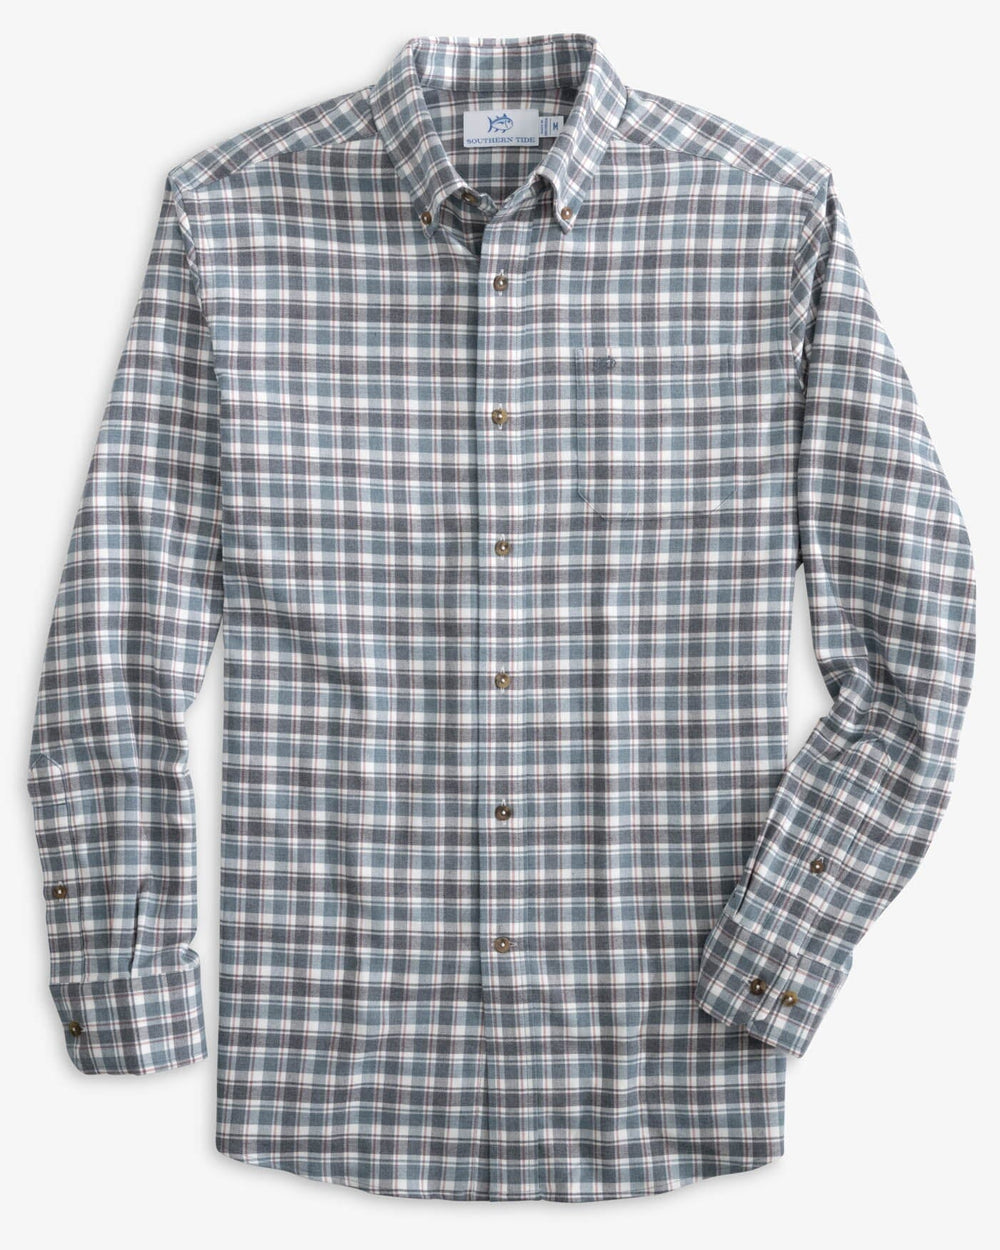 The front view of the Southern Tide Heather Chipley Plaid Intercoastal Flannel Sport Shirts by Southern Tide - Heather Dress Blue